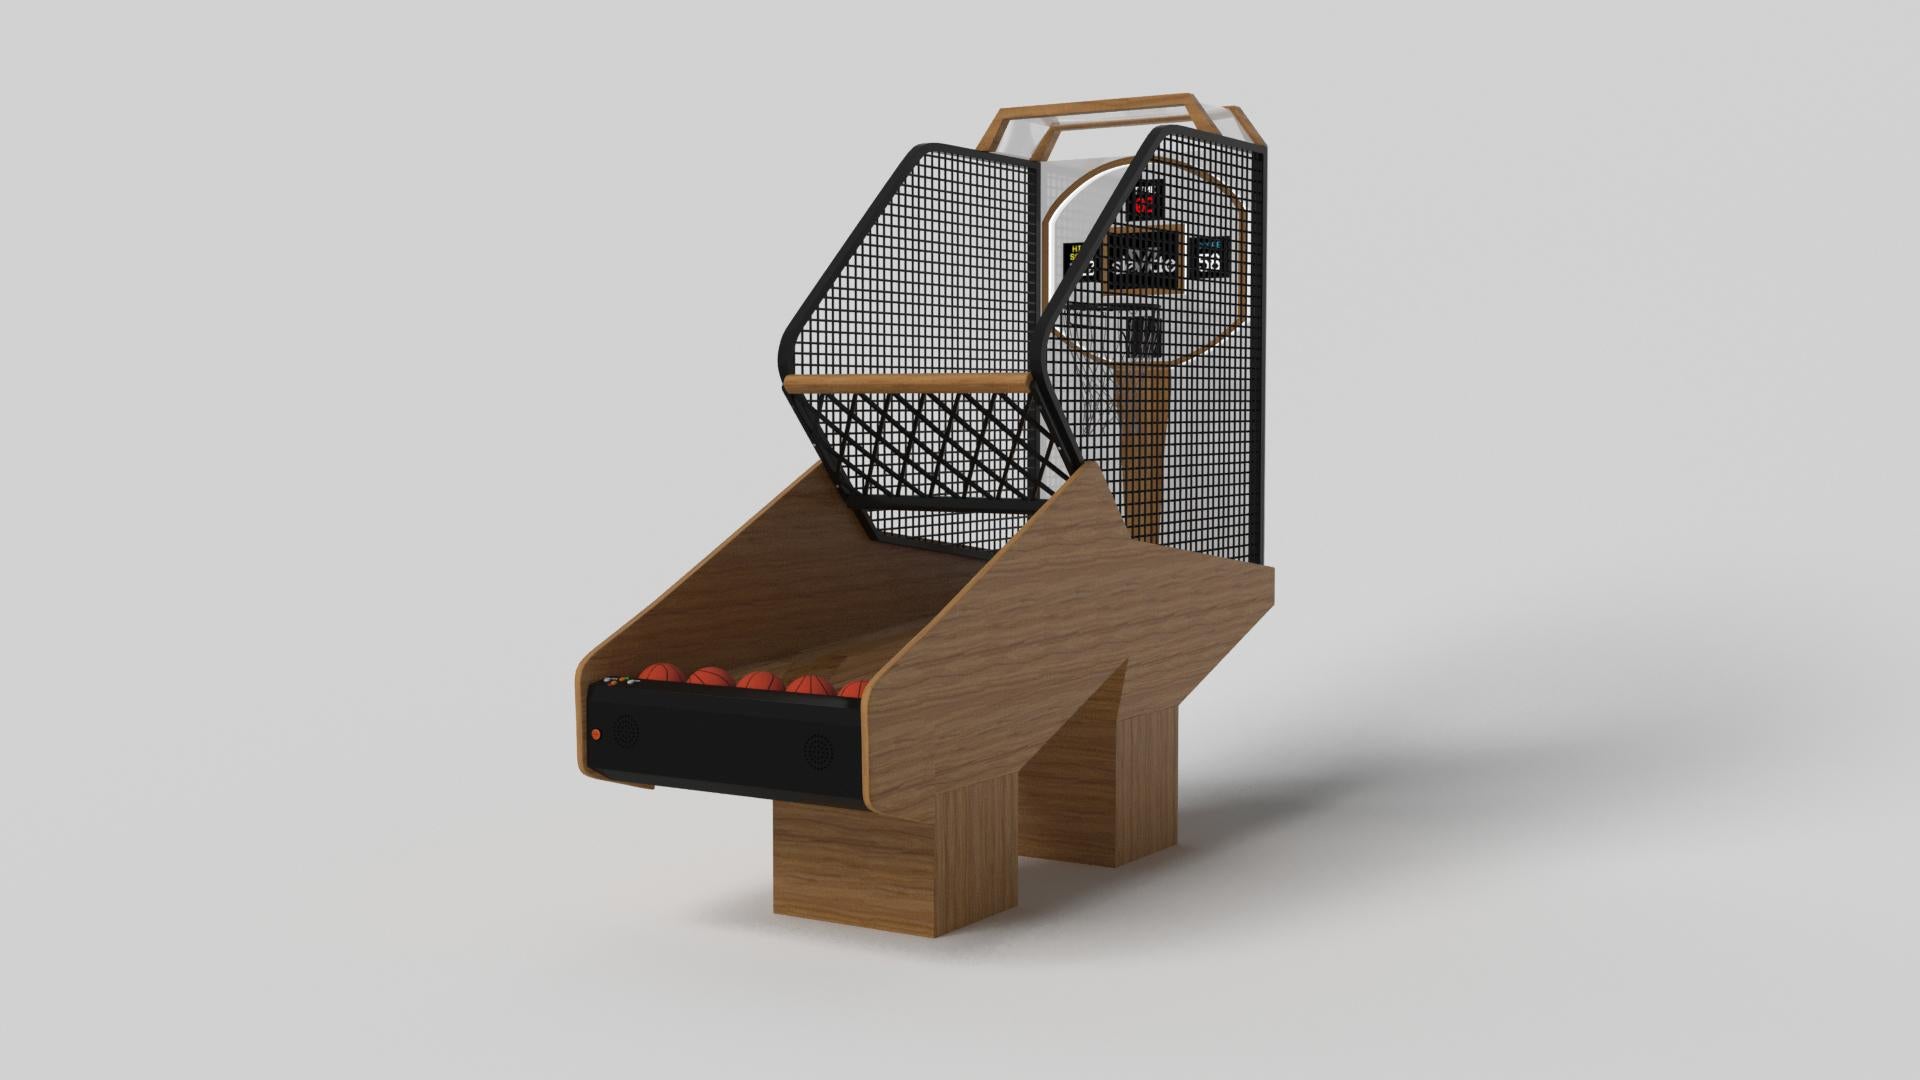 Minimalist design meets opulent elegance in the Trestle basketball game. Detailed with digital components such as sound effects and LED lights, this contemporary game is expertly crafted. Square block legs give it a stark, geometric look that